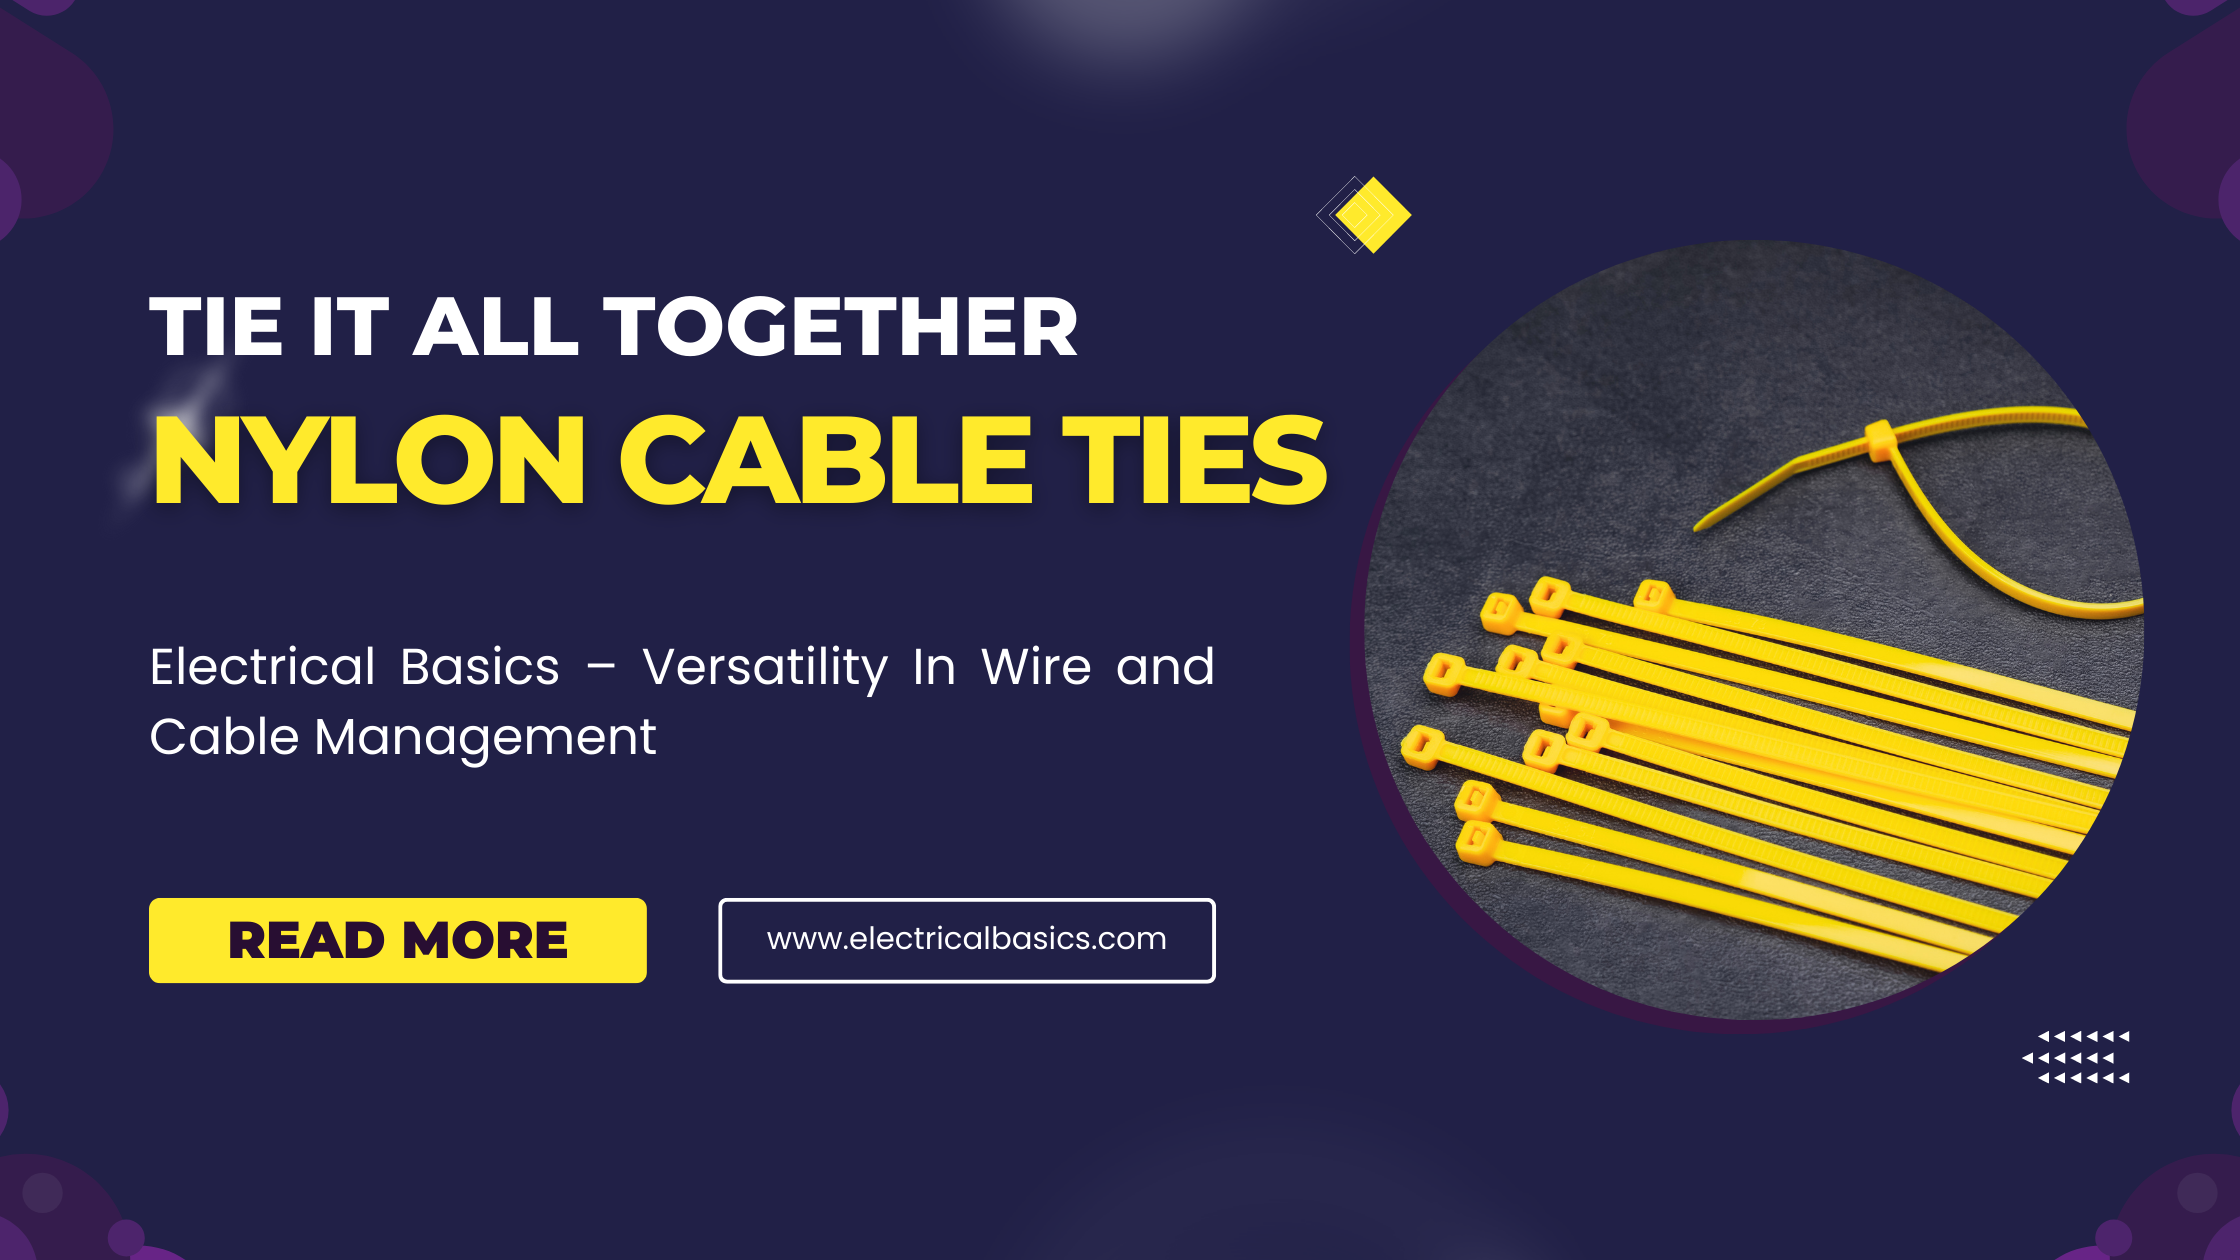 Nylon Cable Ties From Electrical Basics  Versatility In Wire and Cable Management